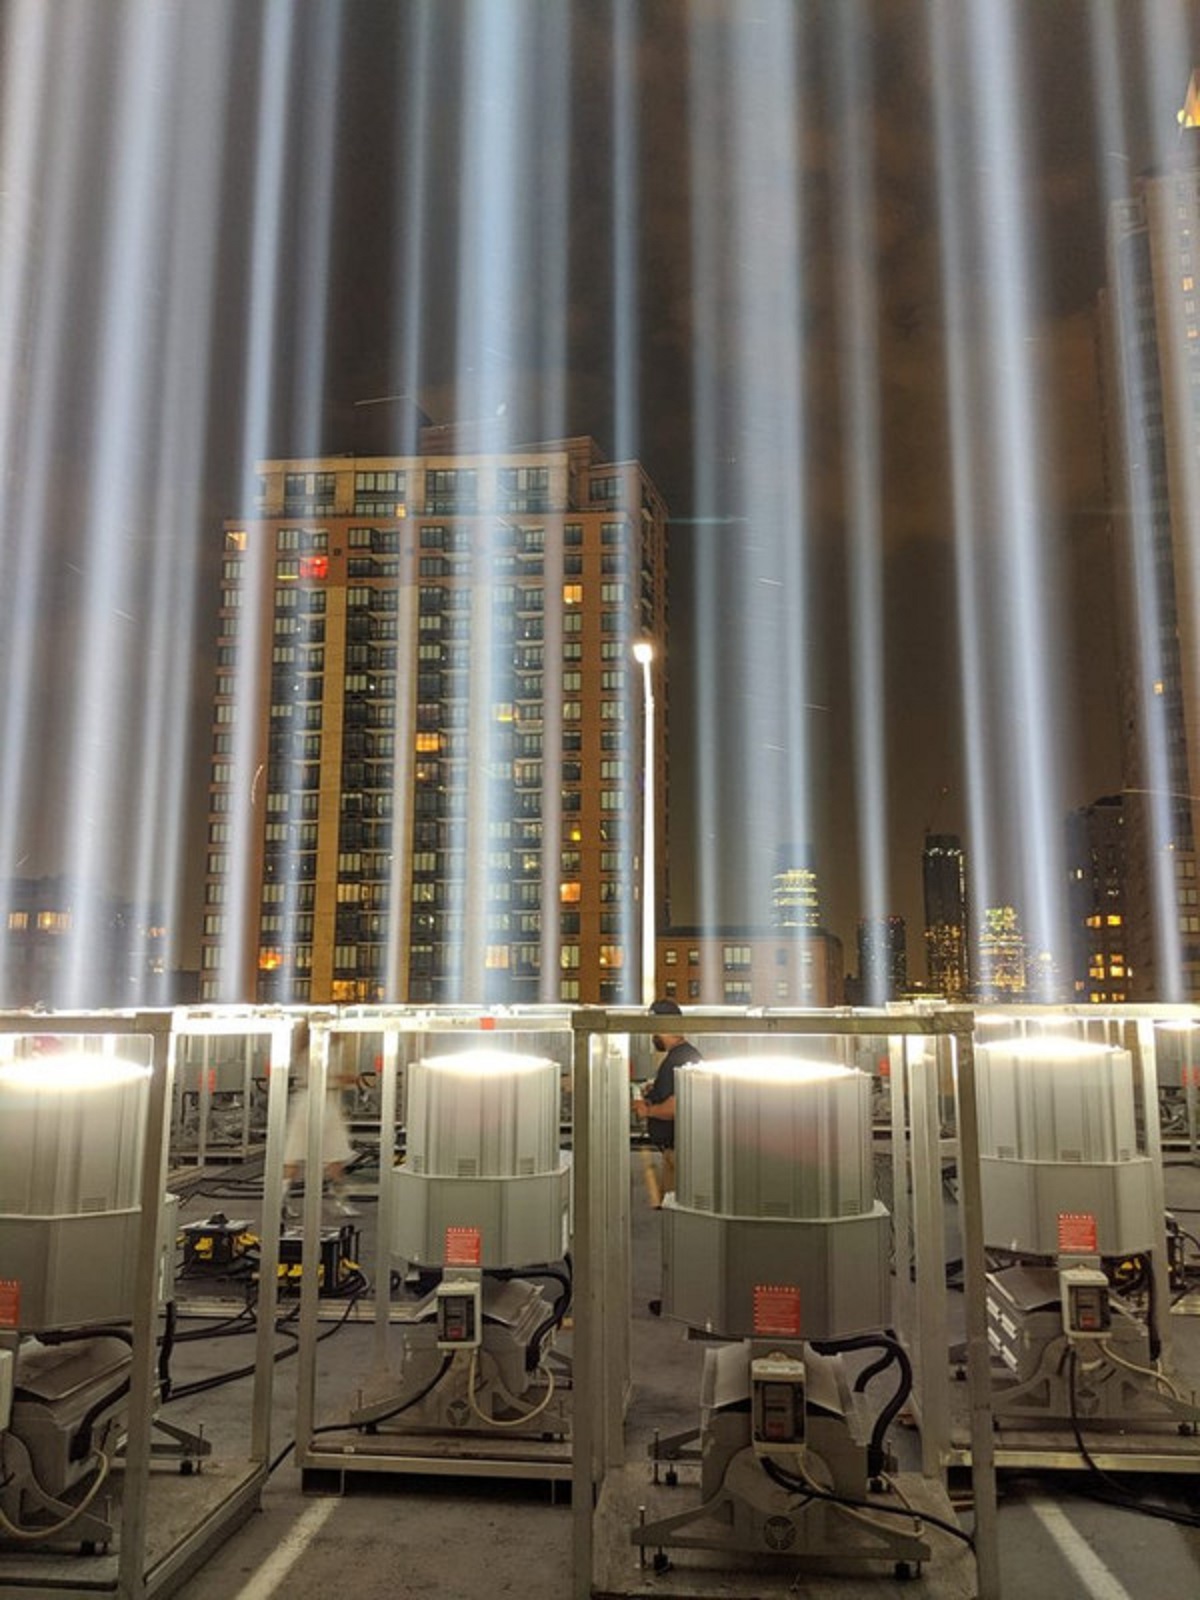 9/11 memorial lights from up close